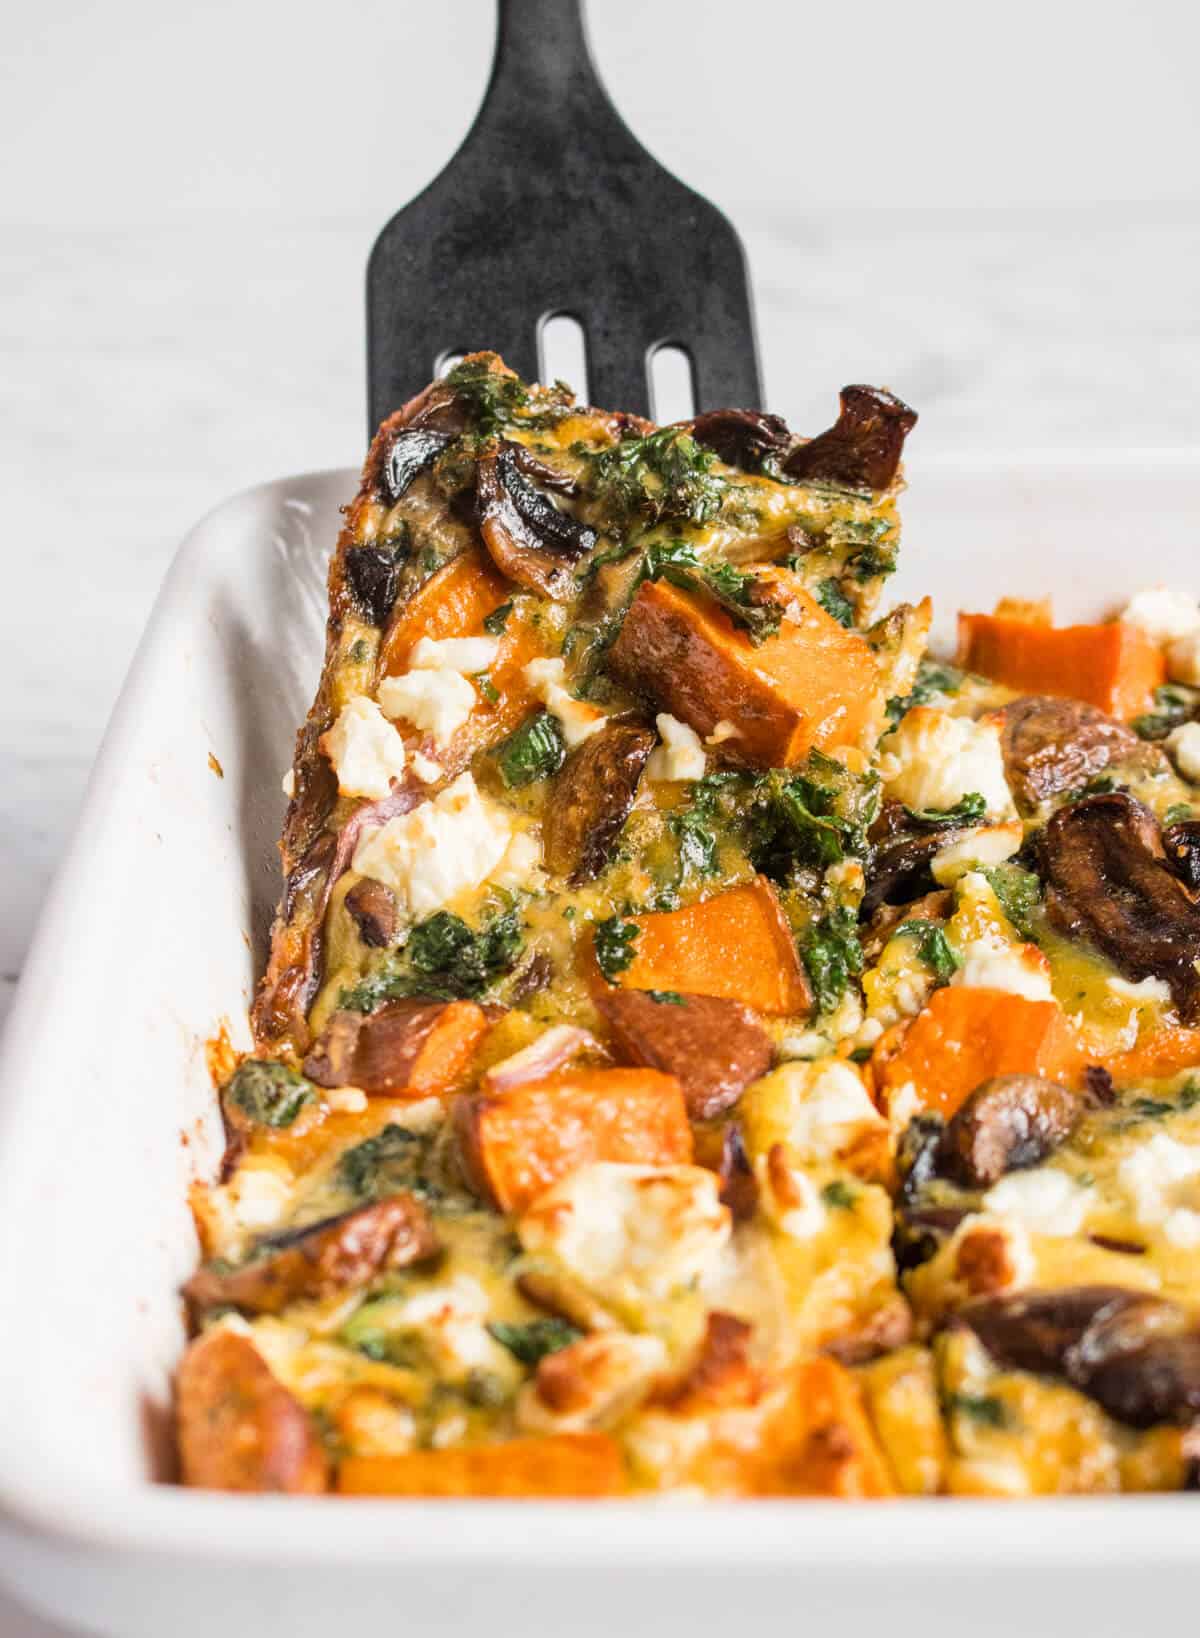 https://cookingwithayeh.com/wp-content/uploads/2020/12/Vegetable-Frittata-3.jpg